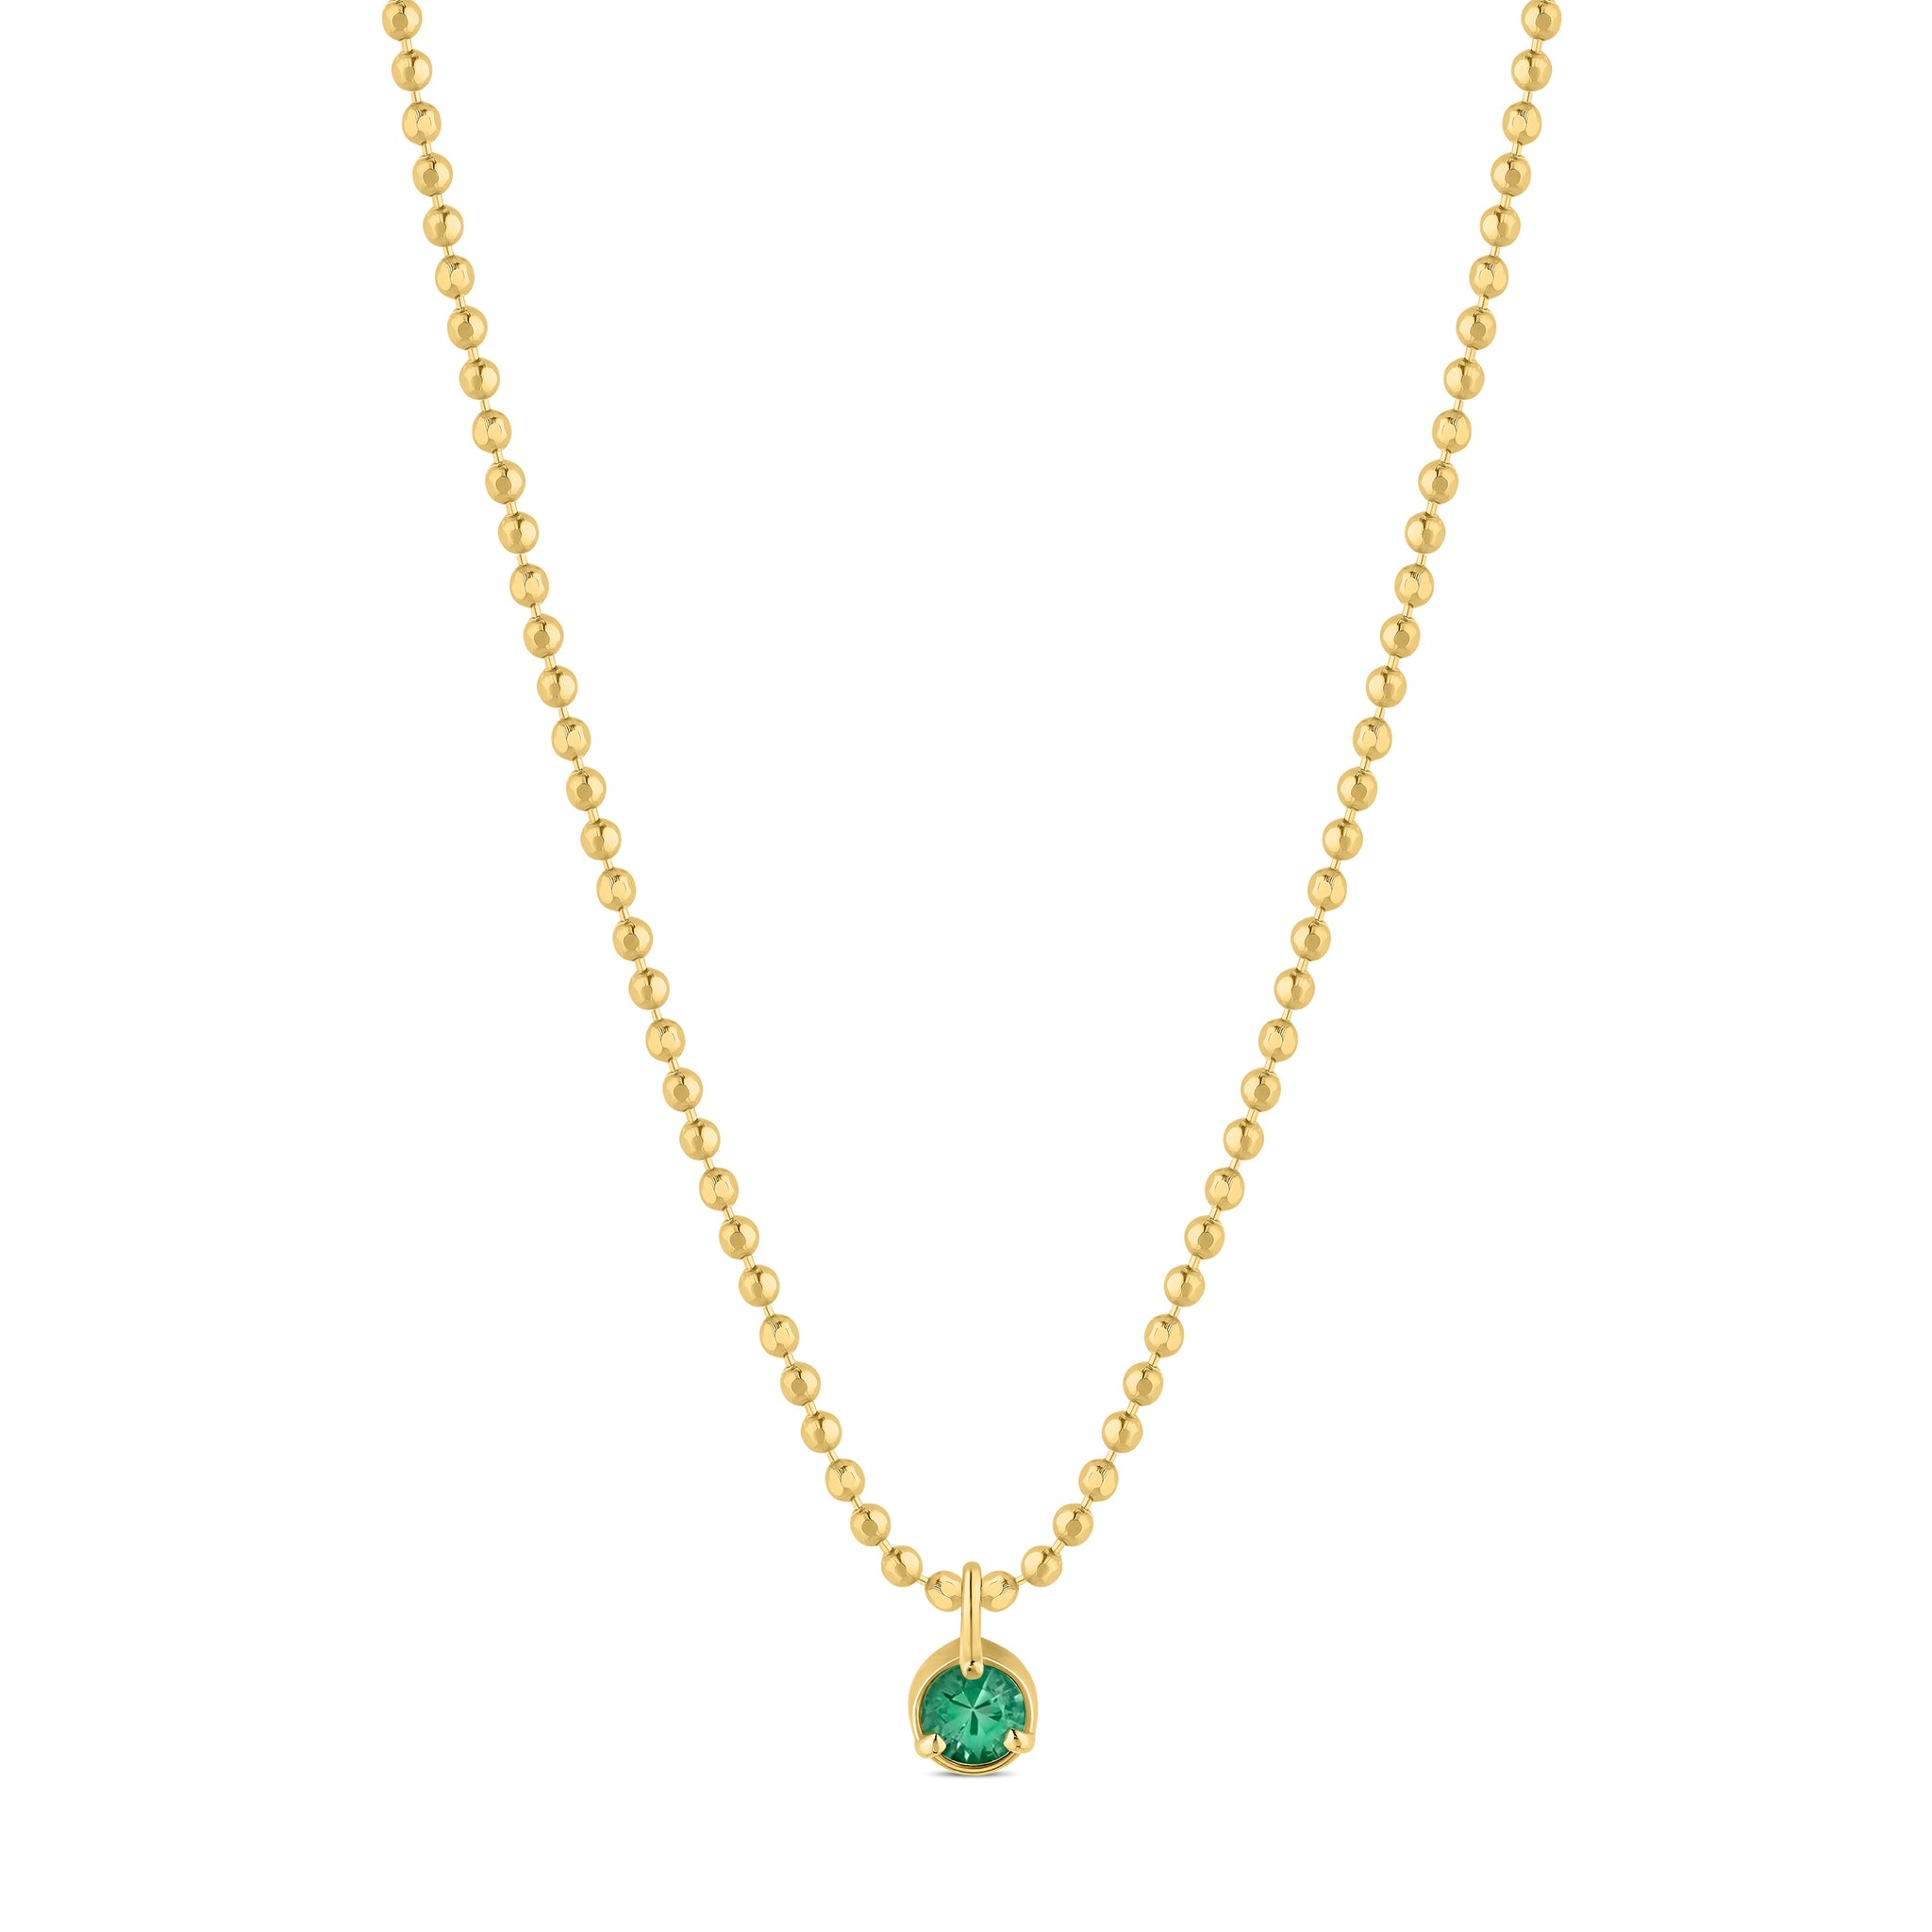 Beaded Chain Emerald Necklace